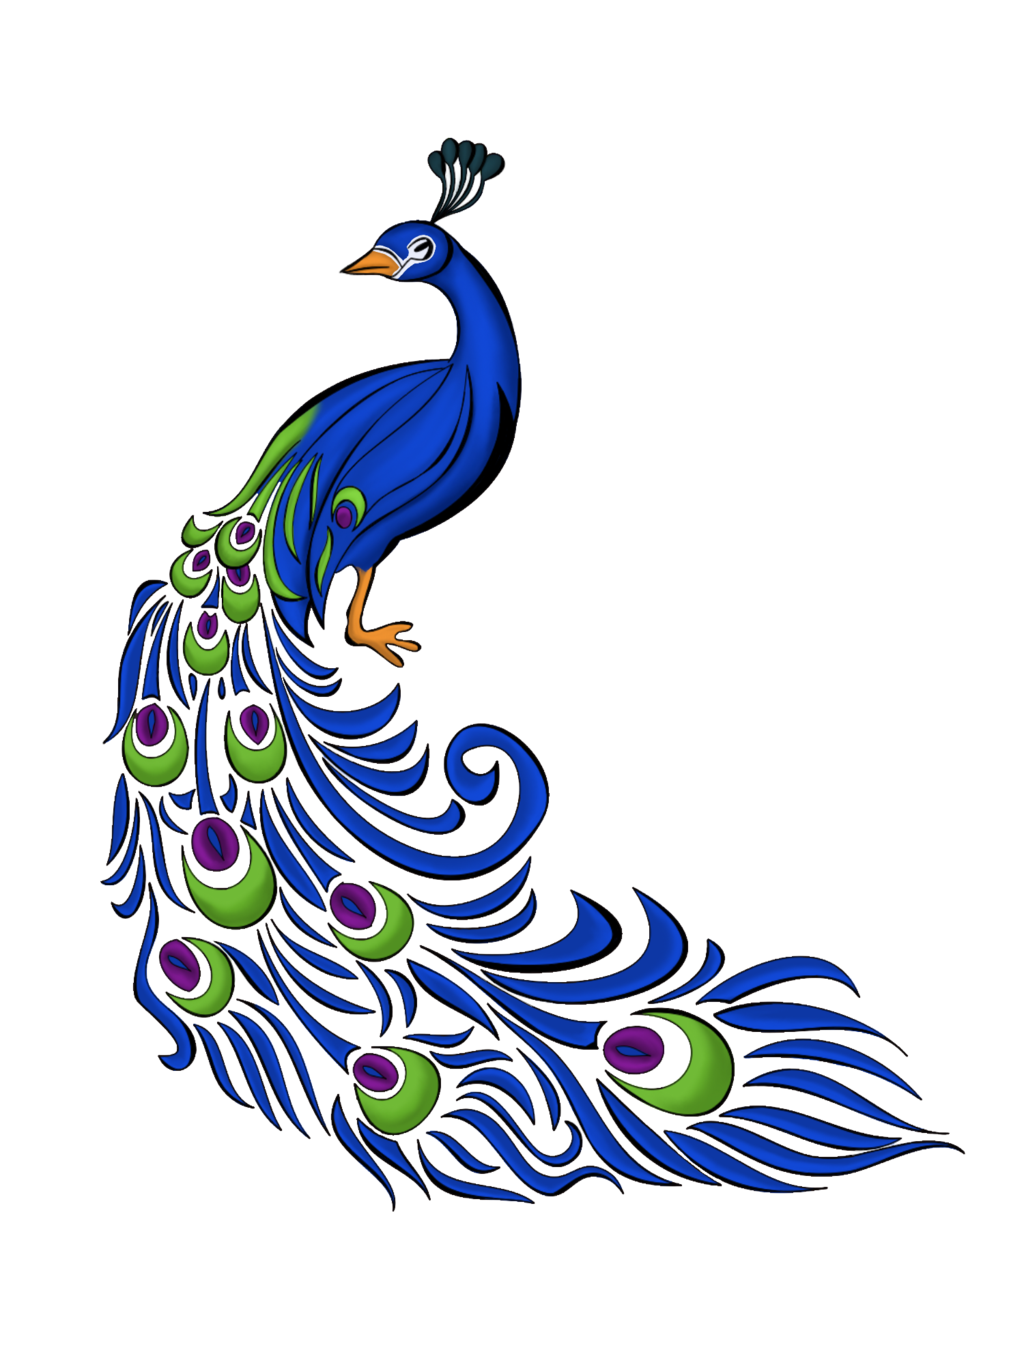 Cute peacock drawing easy || How to draw a peacock step by step | Cute peacock  drawing easy. How to draw a peacock step by step for beginners and kids. |  By